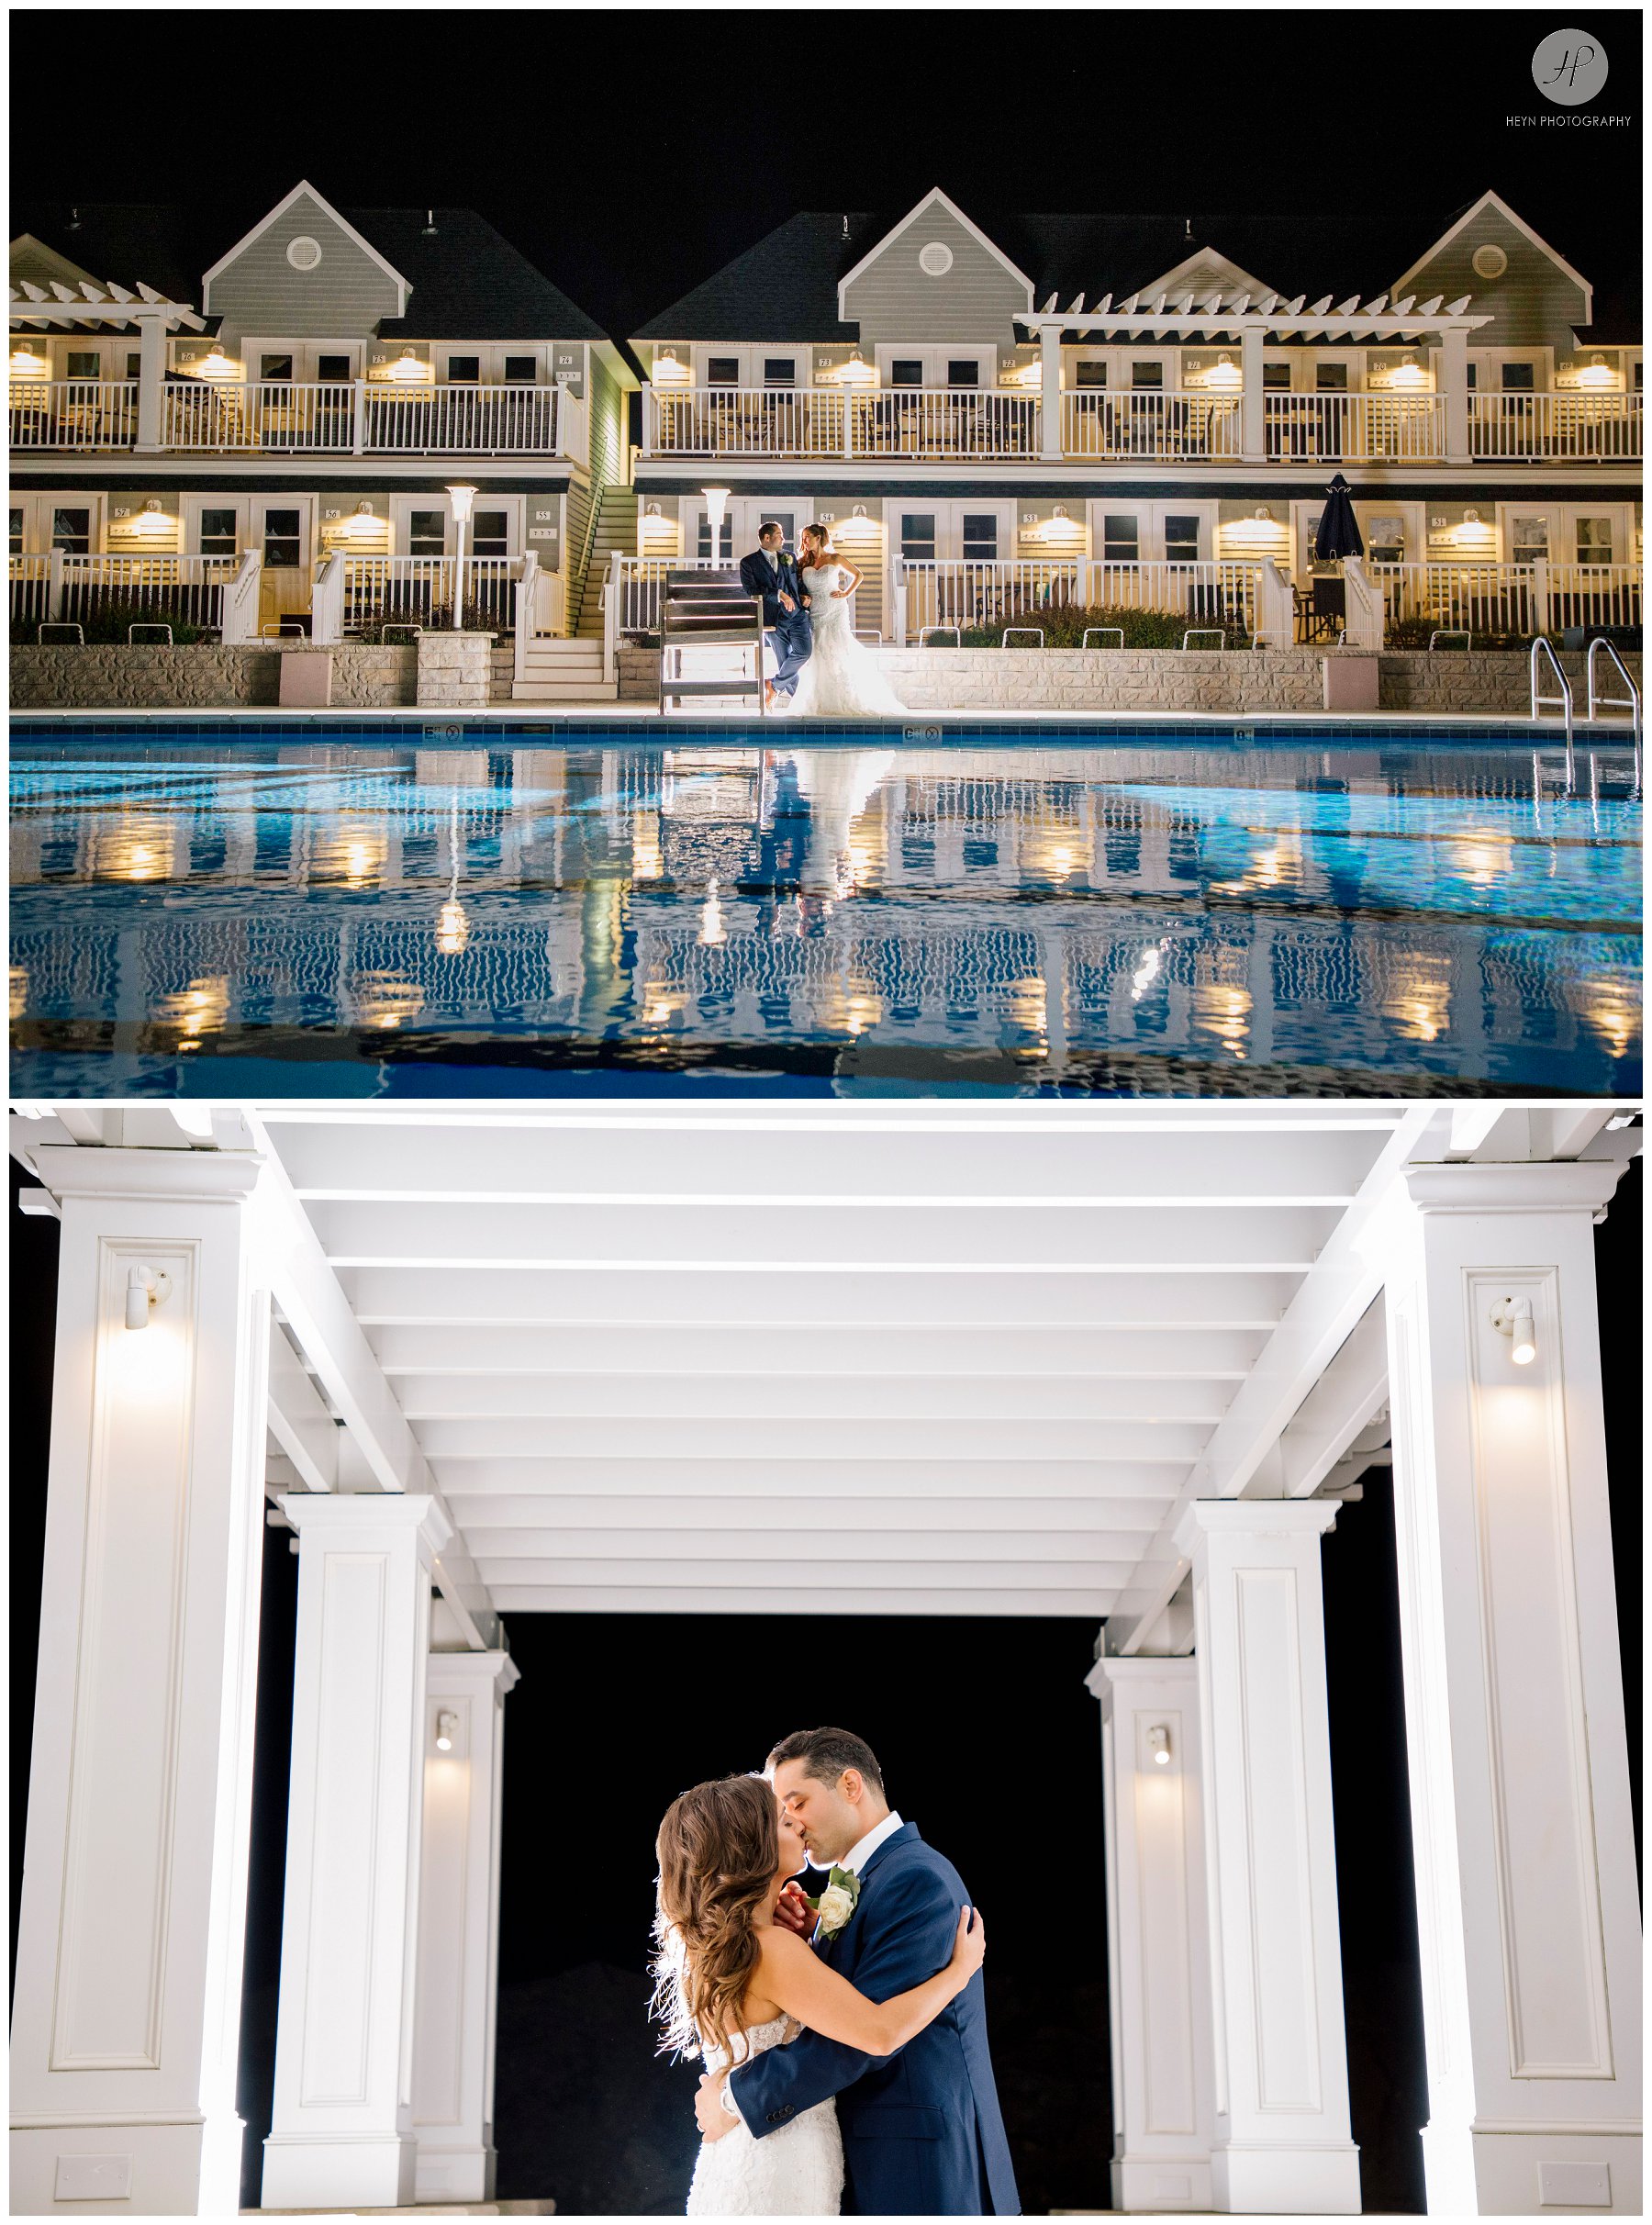 bride and groom at night at edgewater beach club wedding in new jers